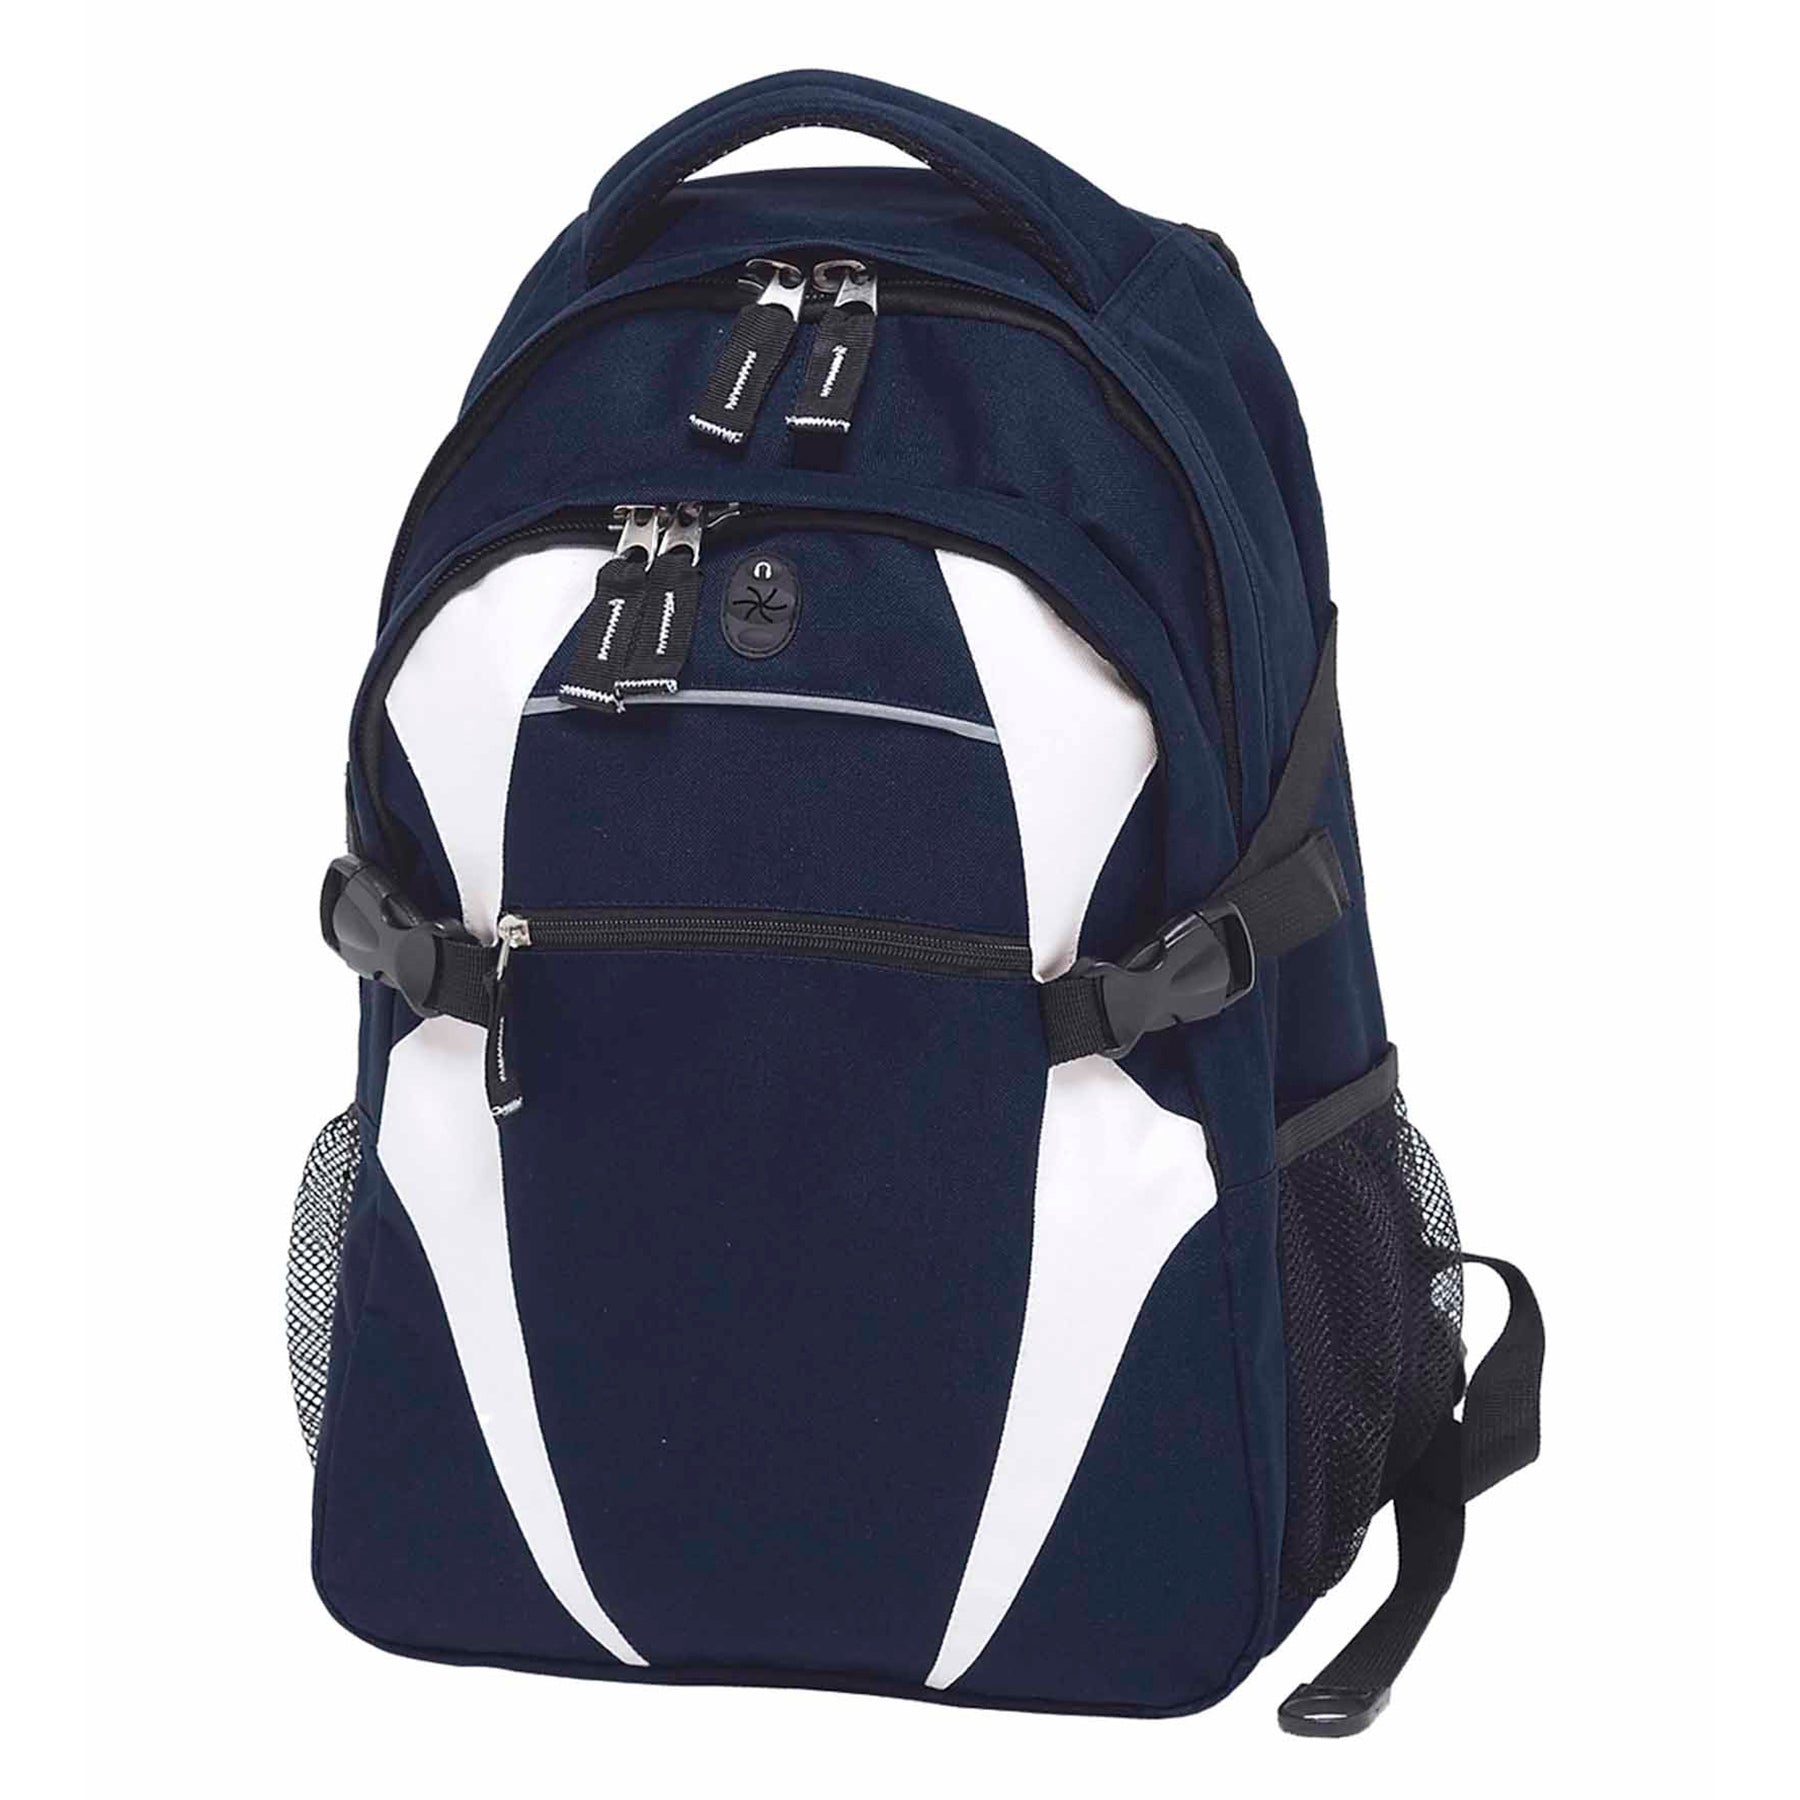 House of Uniforms The Spliced Zenith Backpack Gear for Life Navy/White